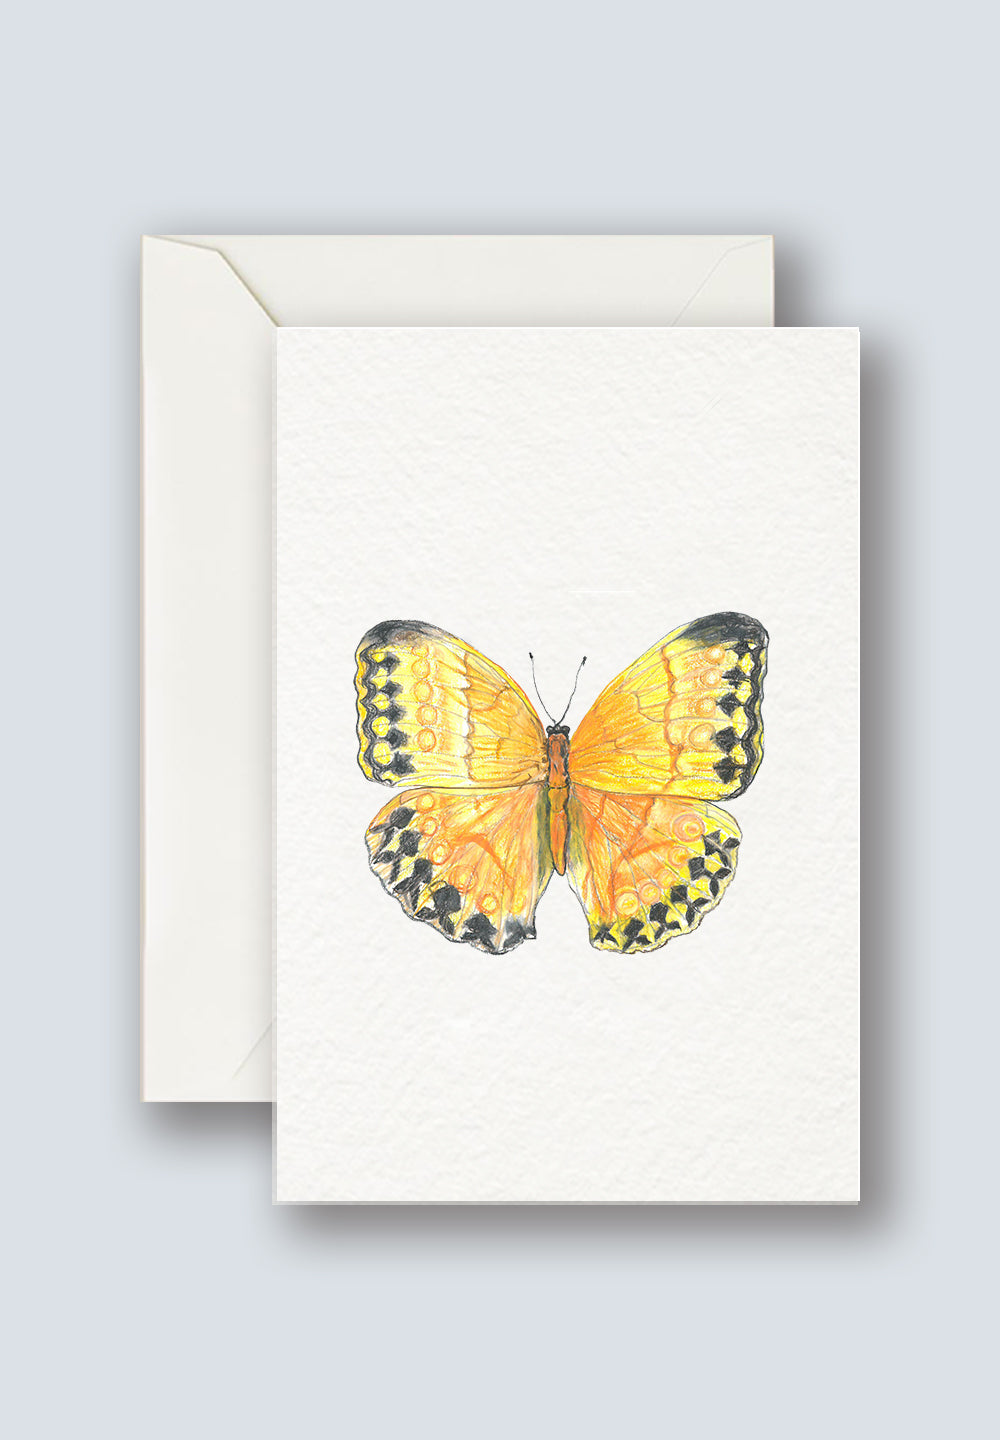 AR Interactive Butterfly Greeting Card - Thinking of You